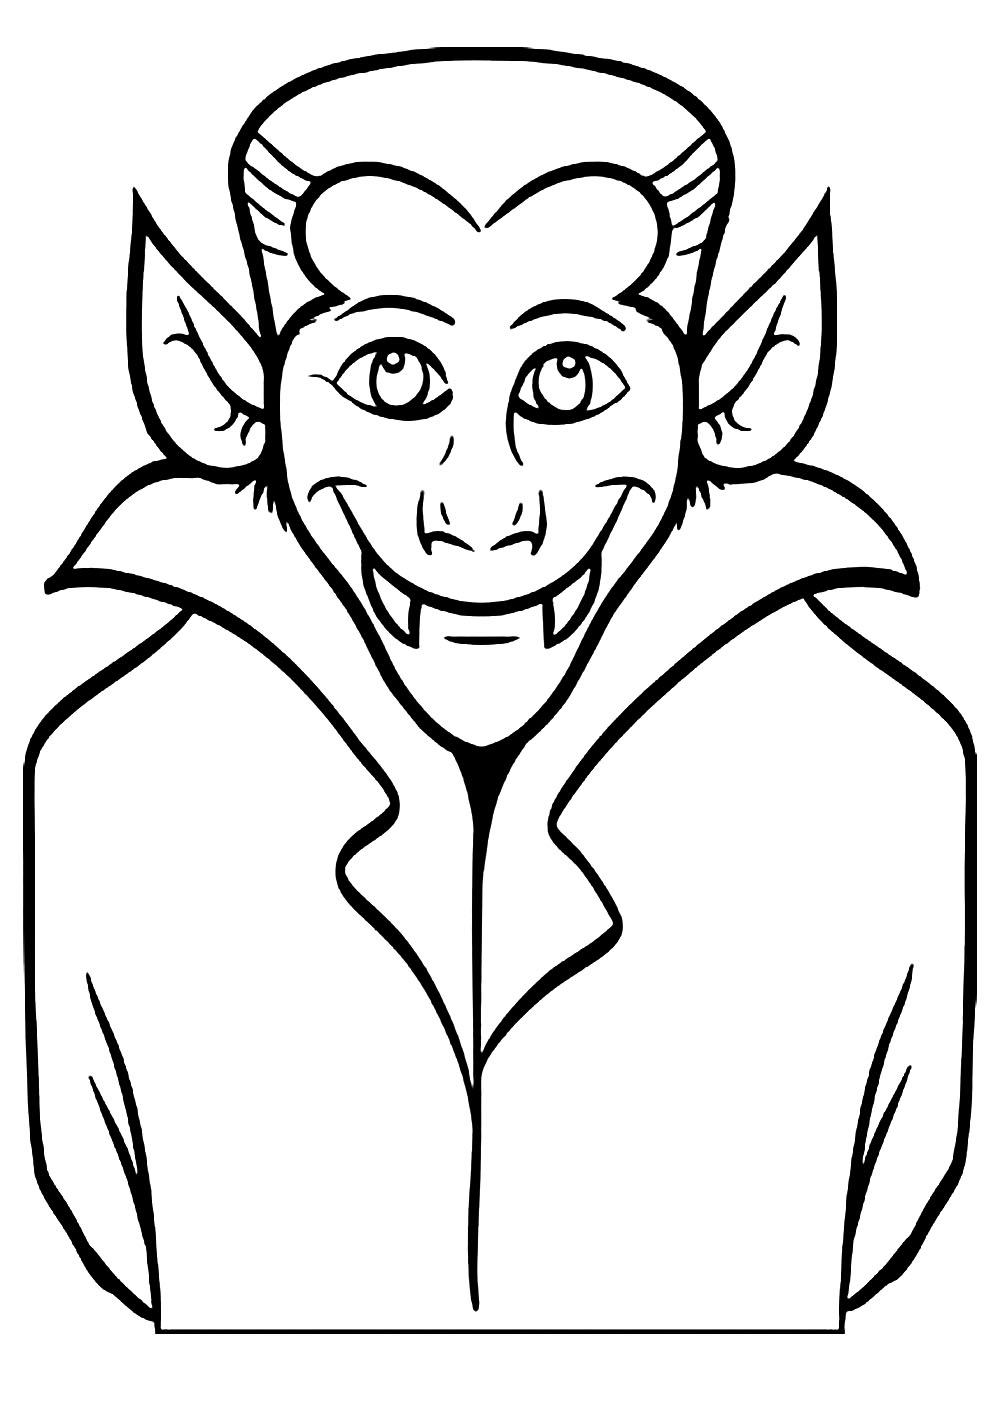 dracula-halloween-kids-coloring-pages